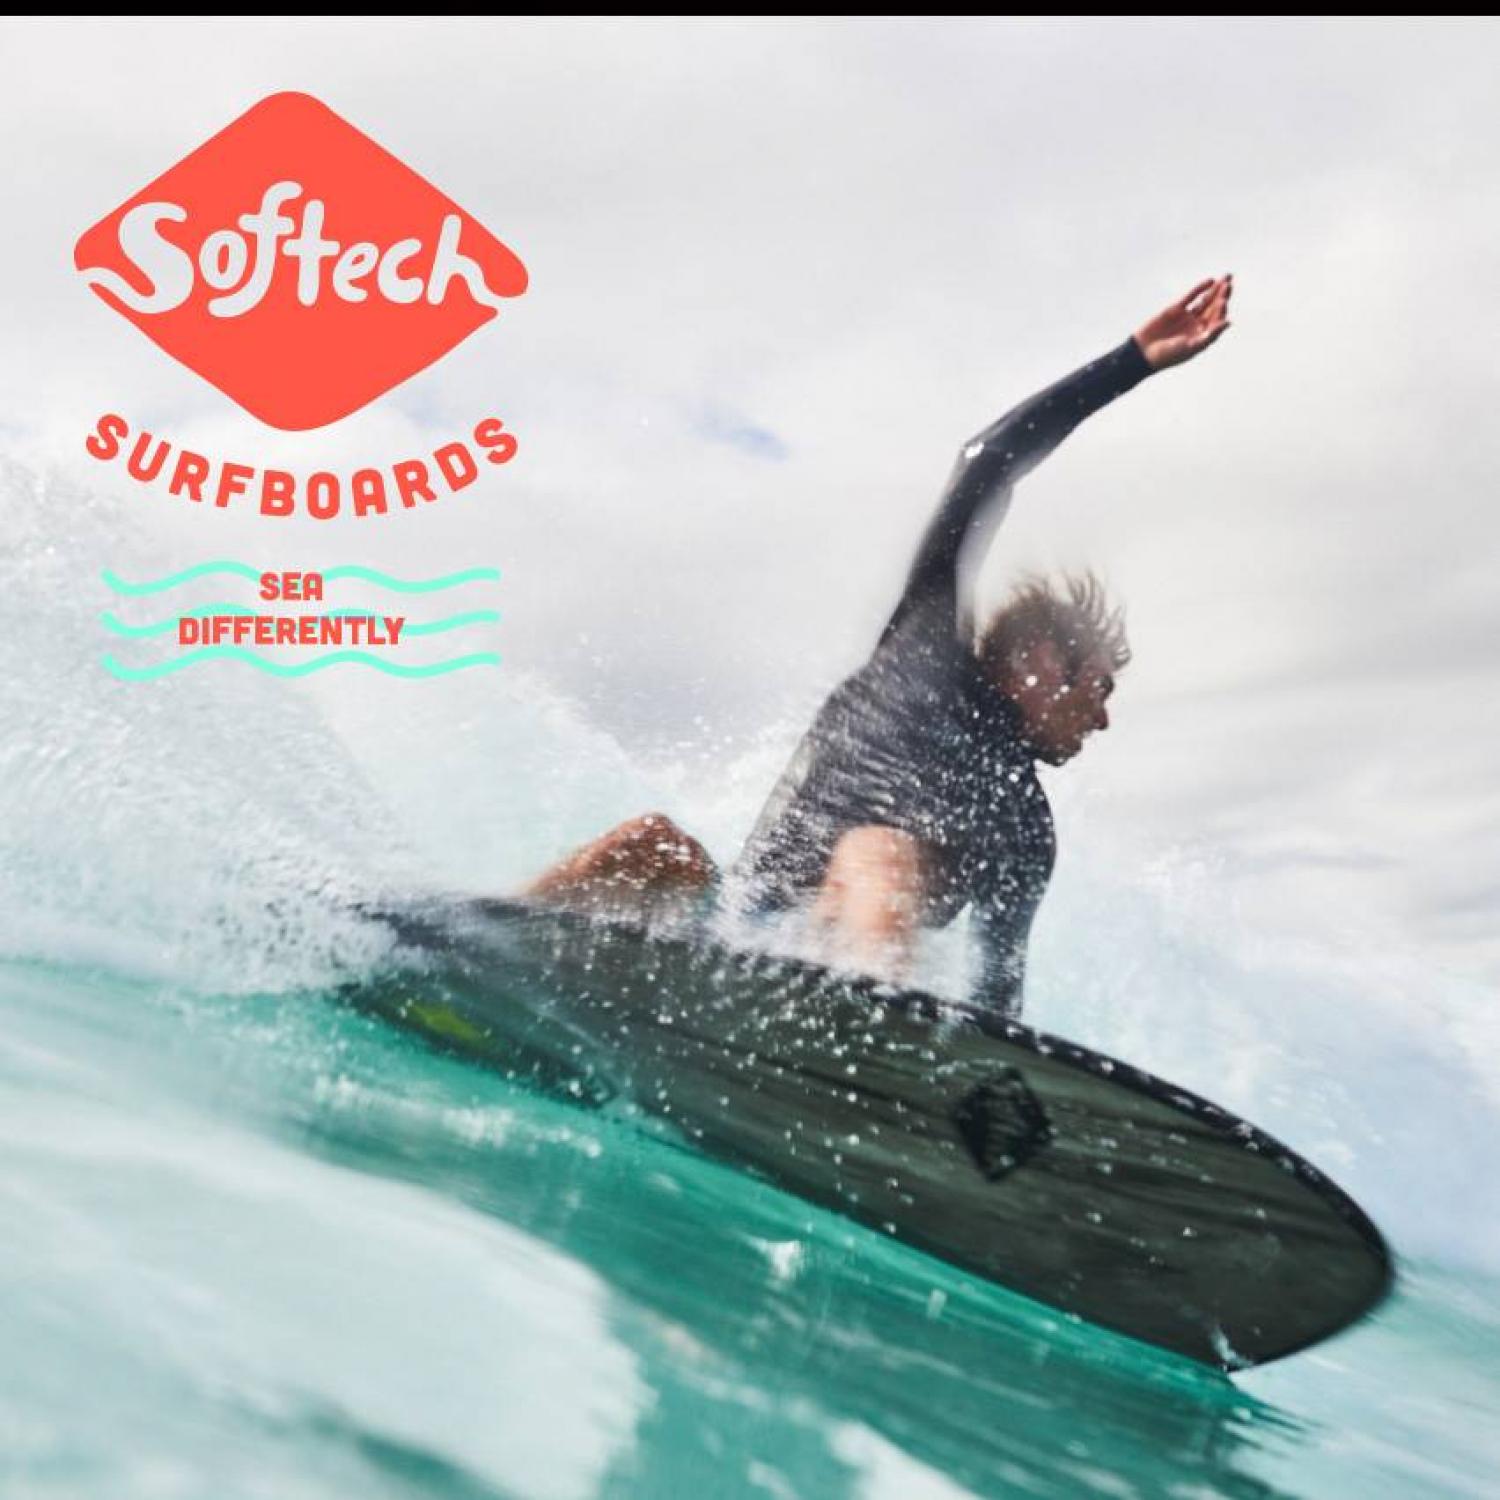 Softech Surfboards 入荷予定のお知らせ 1